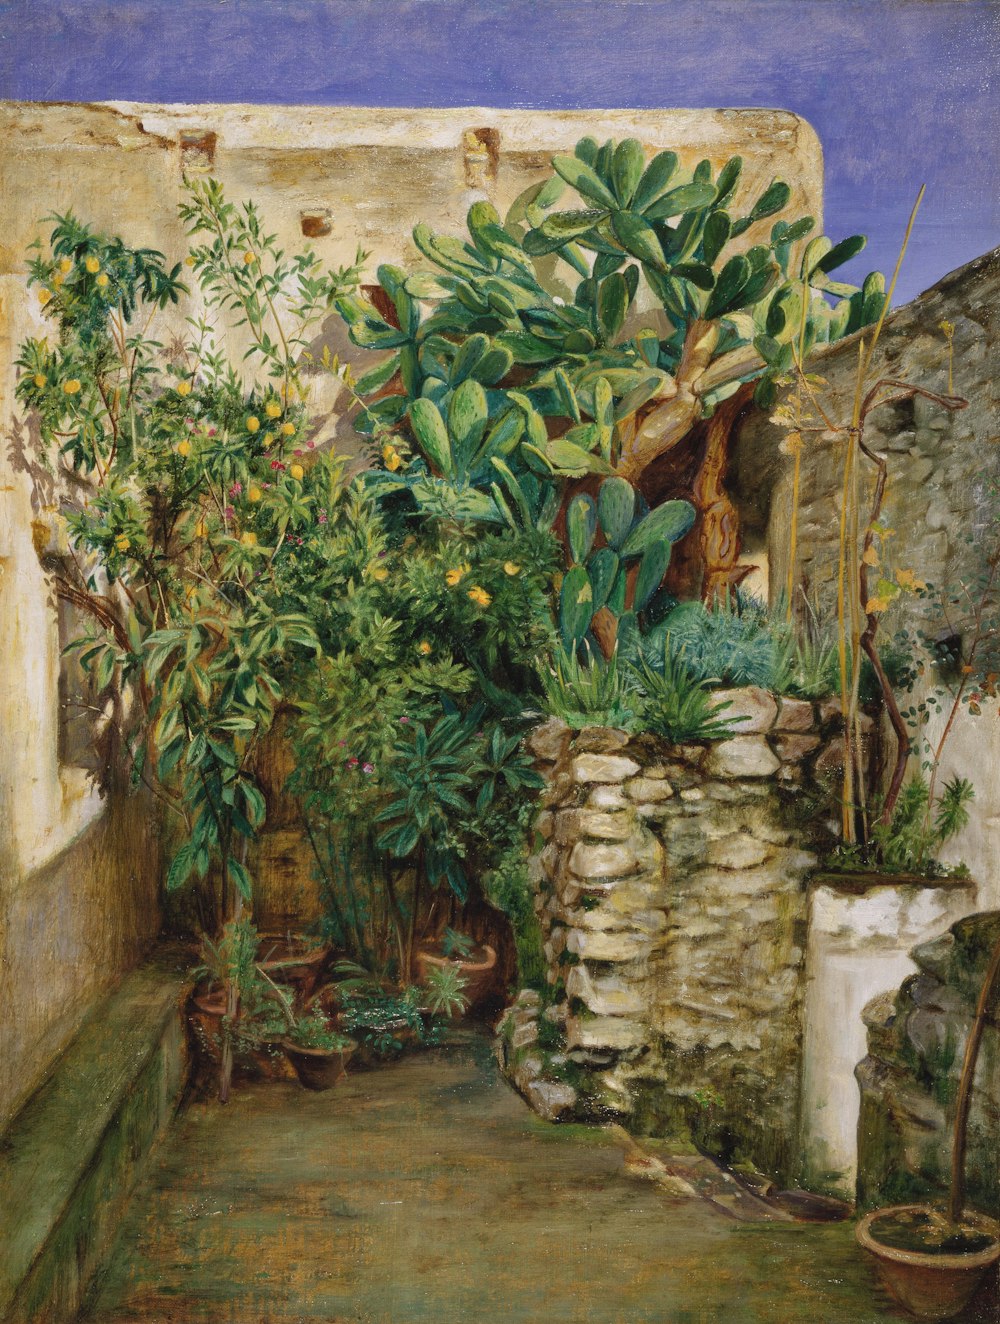 a painting of a courtyard with potted plants